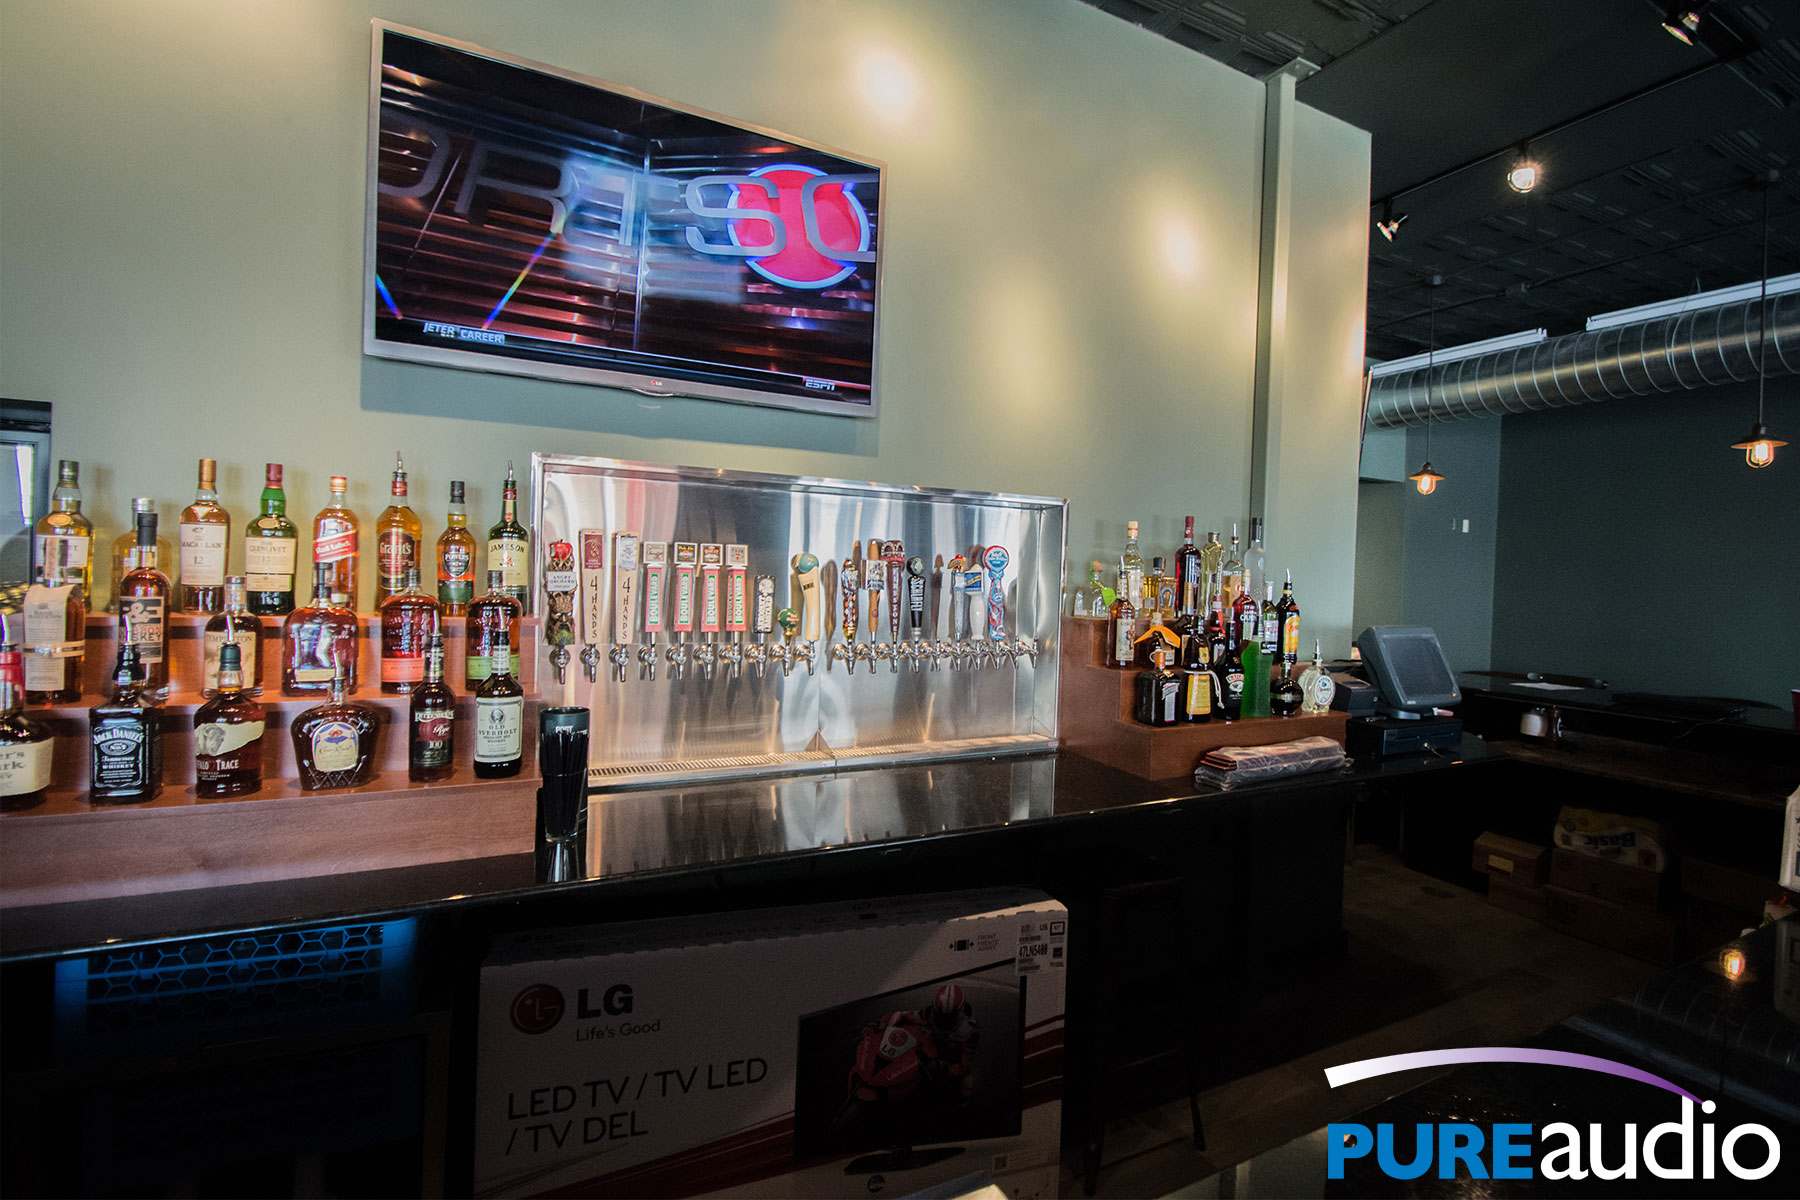 Watch Sports Center at your bar on a mounted flat-screen TV with completely hidden wires!